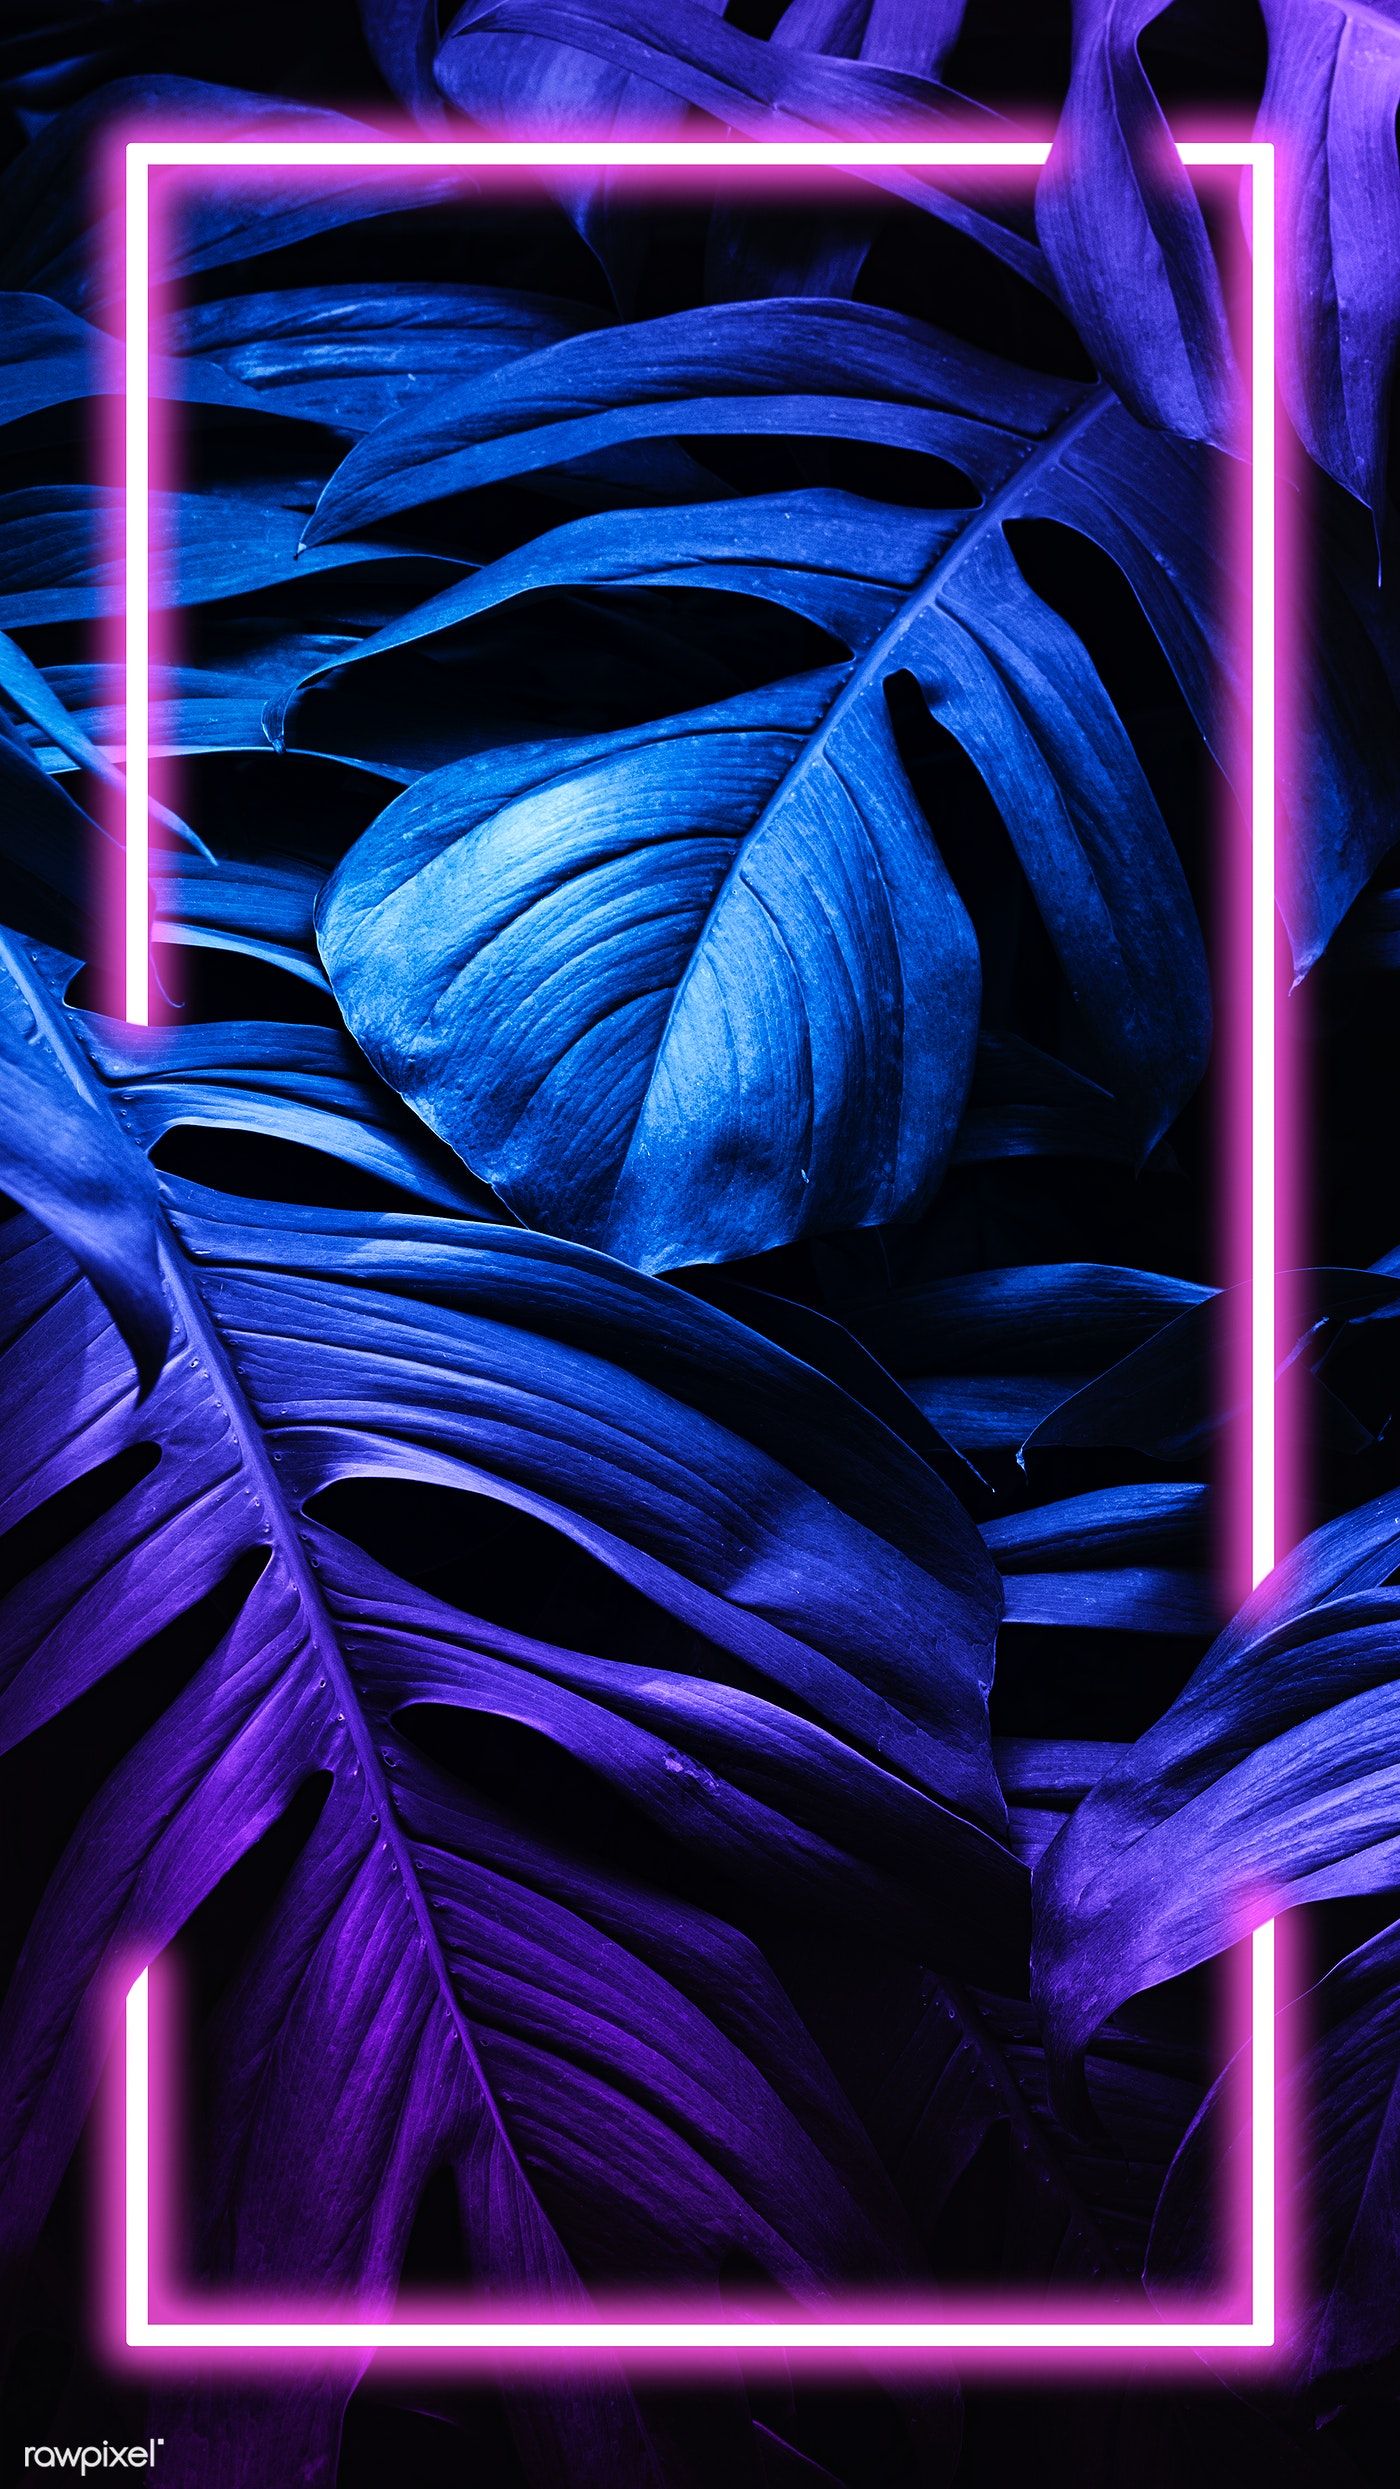 Neon Background Iphone / Neon Wallpapers For Iphone Group 59 : We hope ...